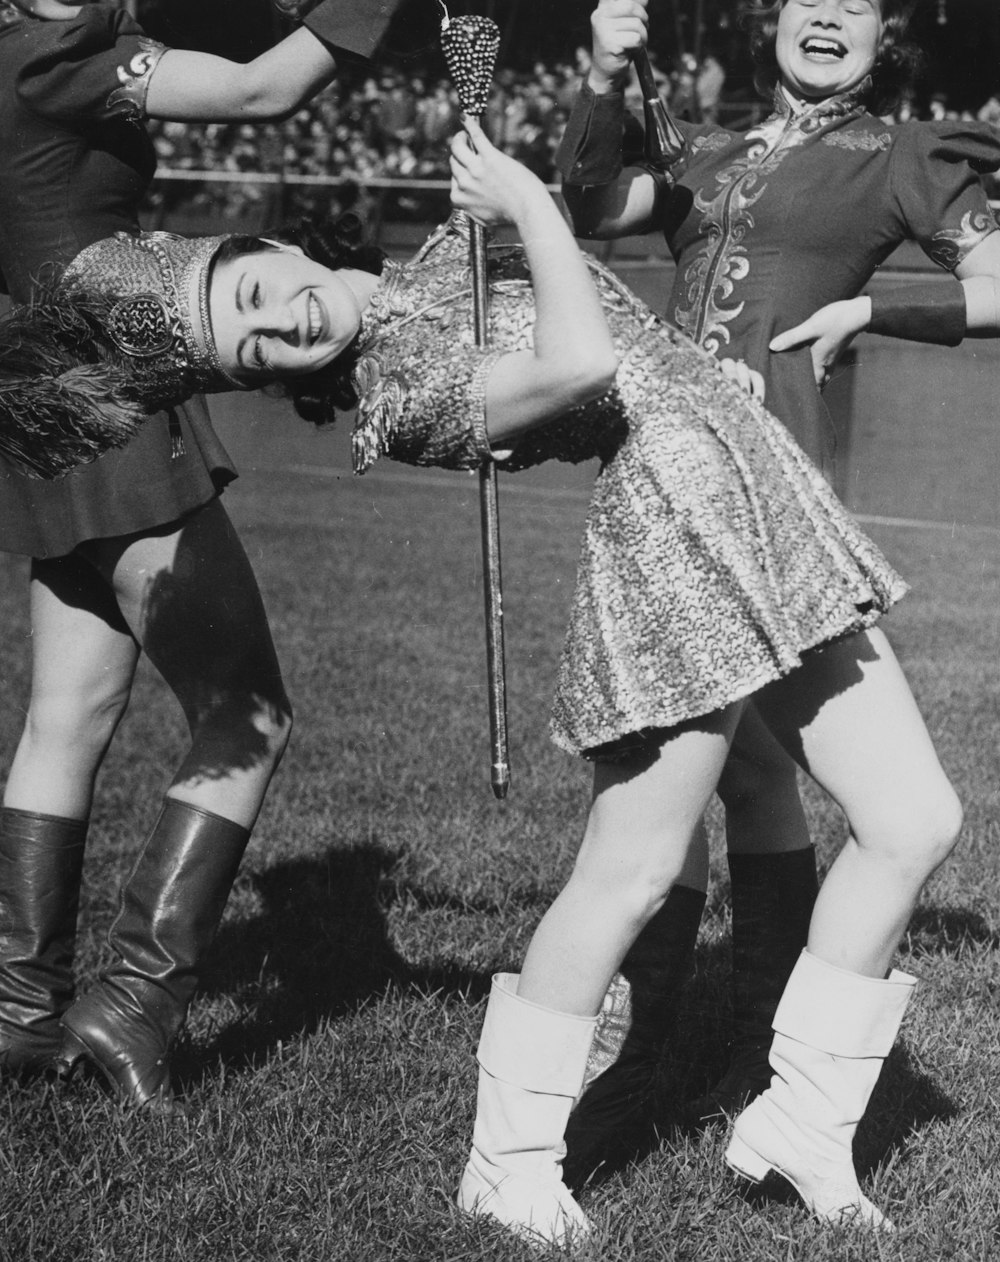 lead majorette, Rita Phillips, doing a back bend while holding a baton; two other majorettes marching on field behind Phillips